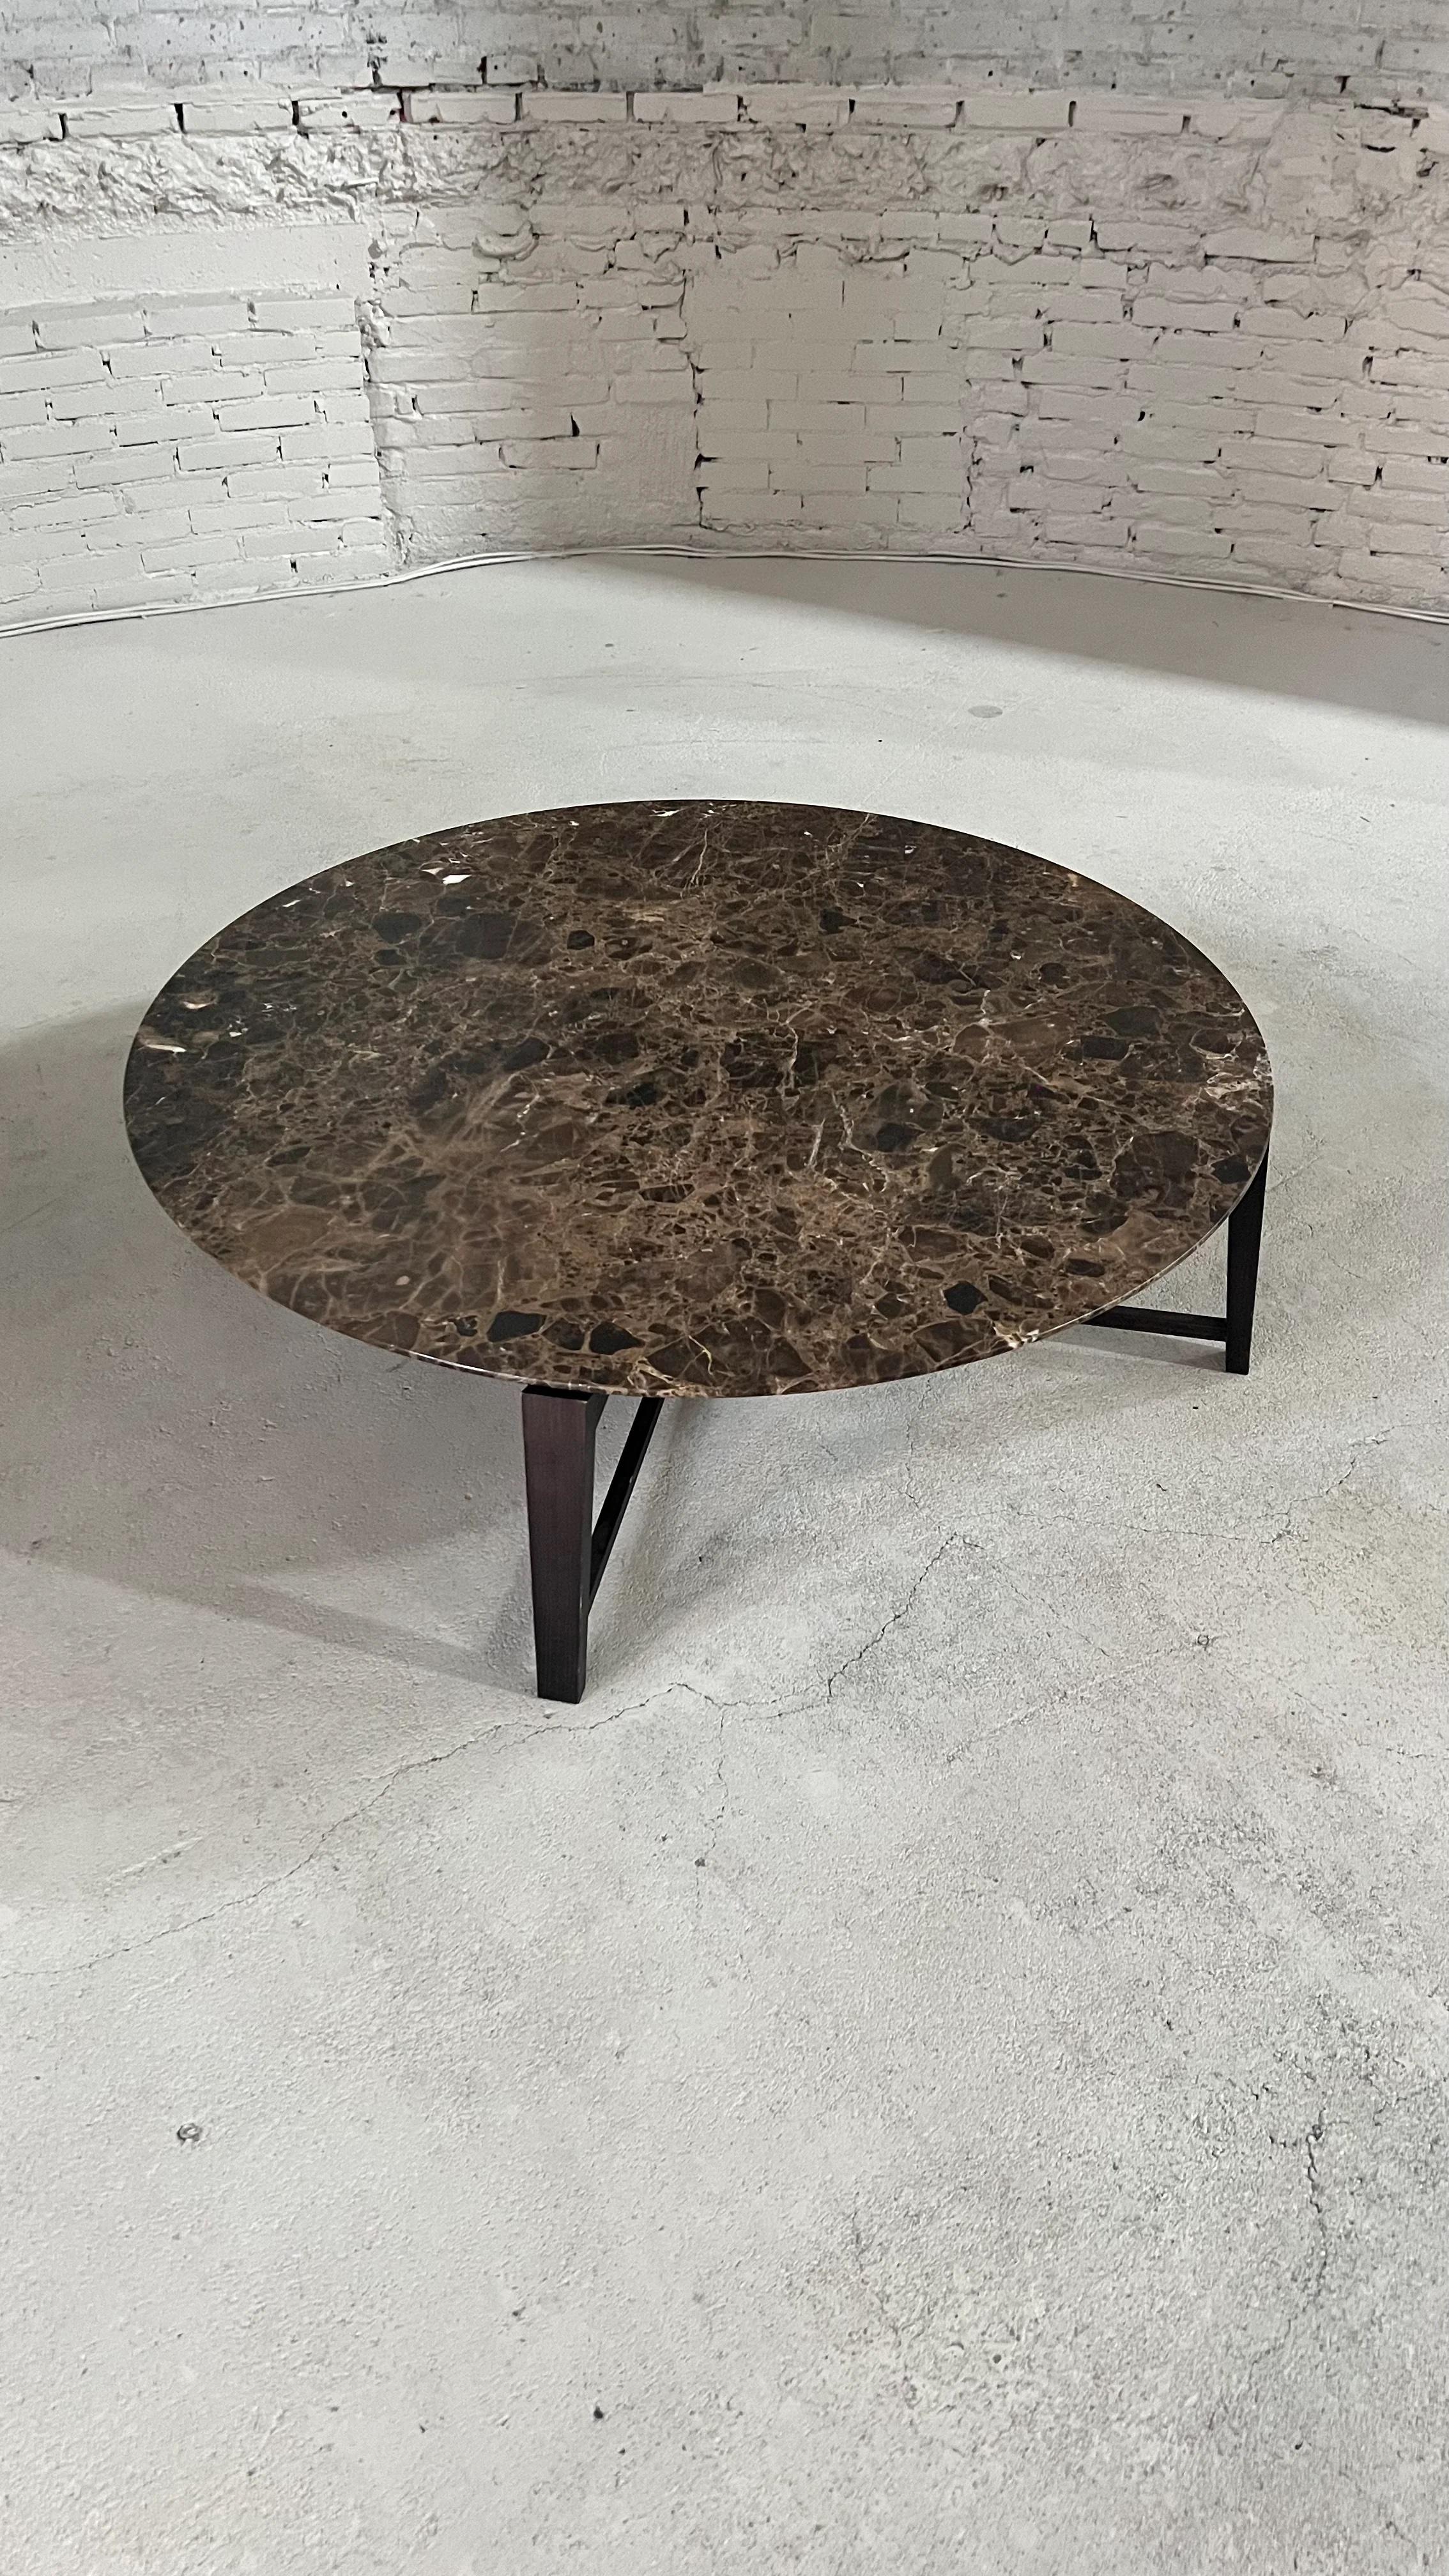 Coffee table with beveled edge made in emperador marble. The base is in solid wood, with crossbars that connect the four legs, forming a particular crossed design near the floor.

The coffeetable is made & designed by Flexform in Italy.